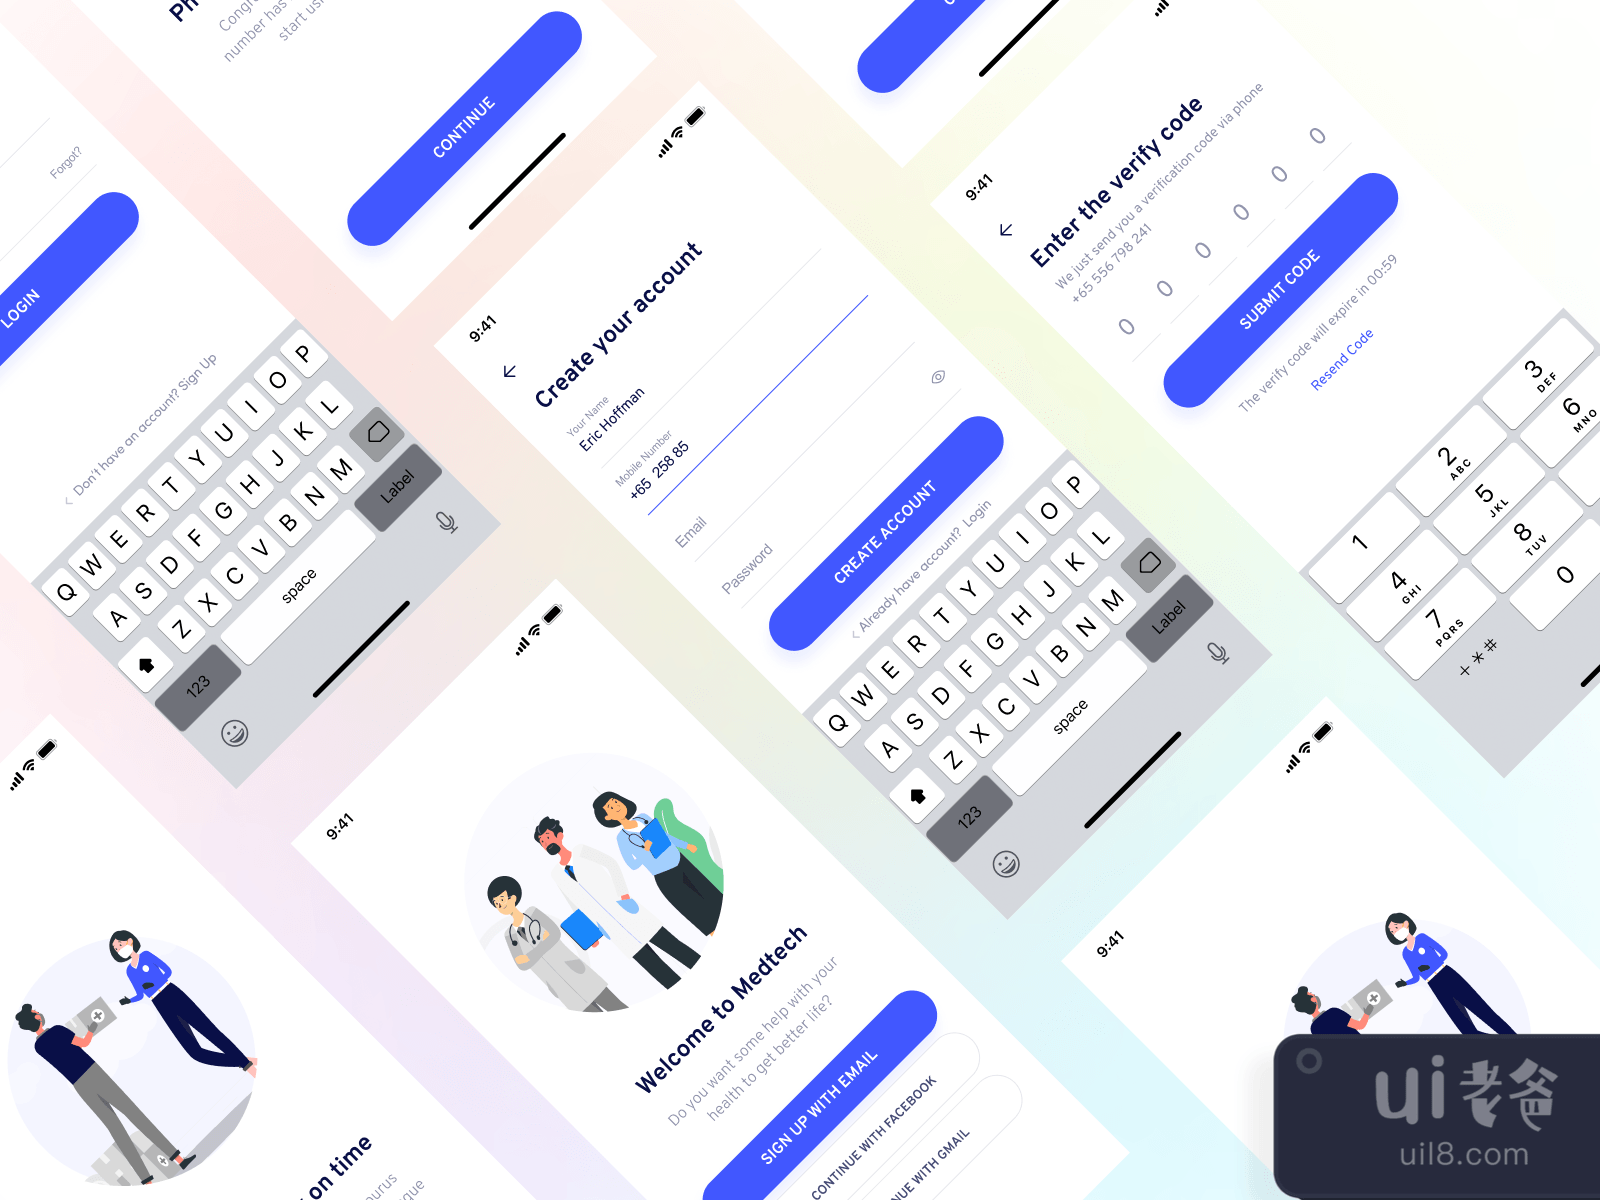 Online Medical Store App UI Kit for Figma and Adobe XD No 3